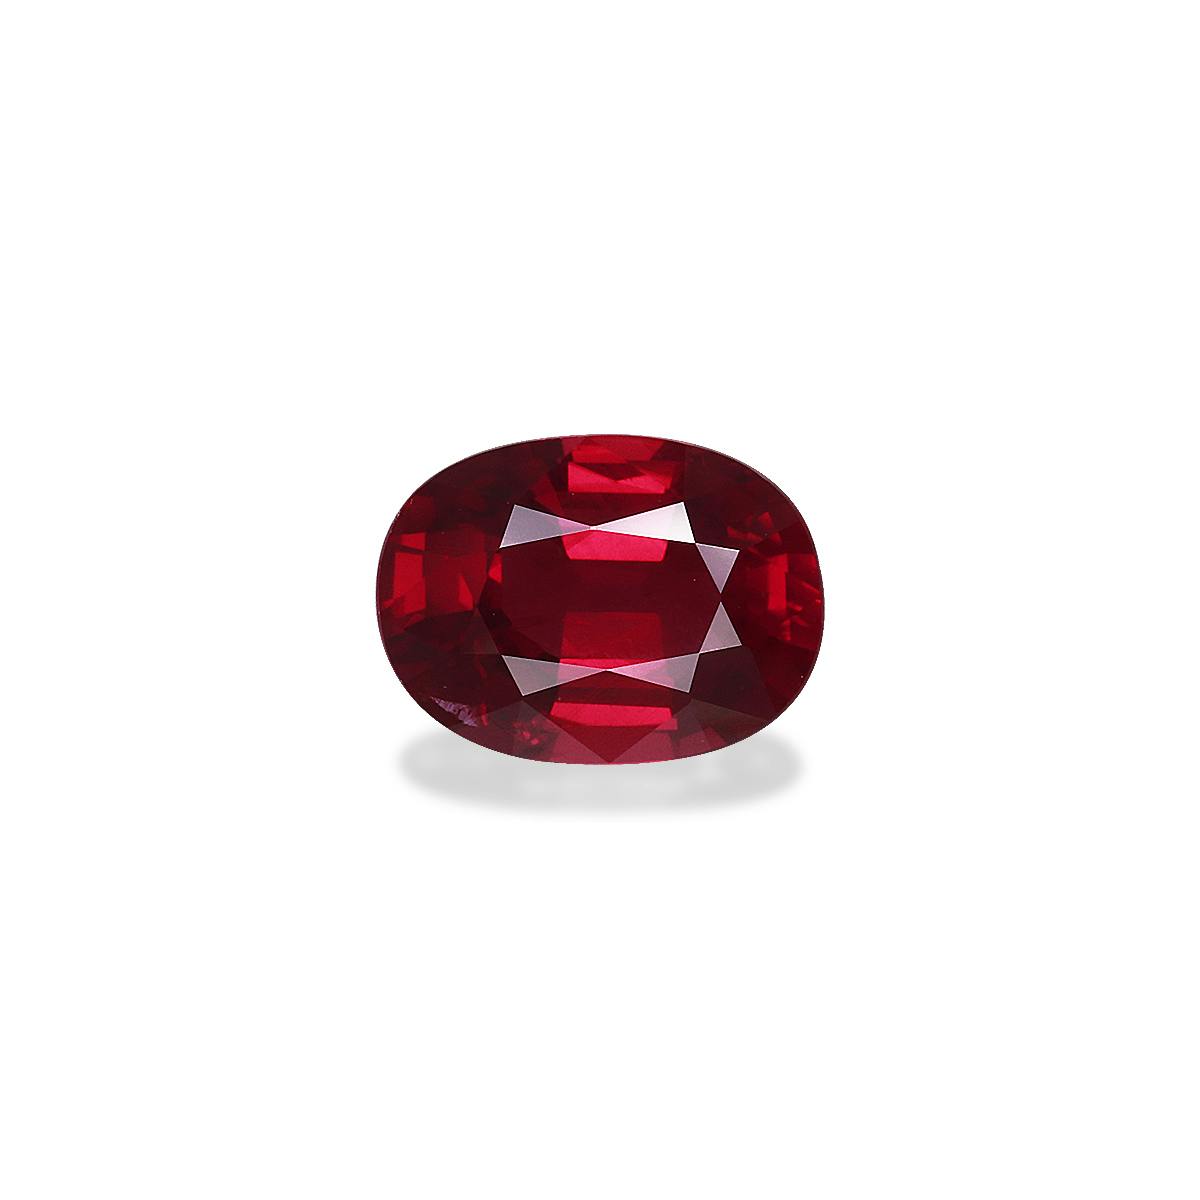 Details about   7.00 mm Pair Natural Mozambique Red Ruby Trillion Cut Loose Certified Gemstone 